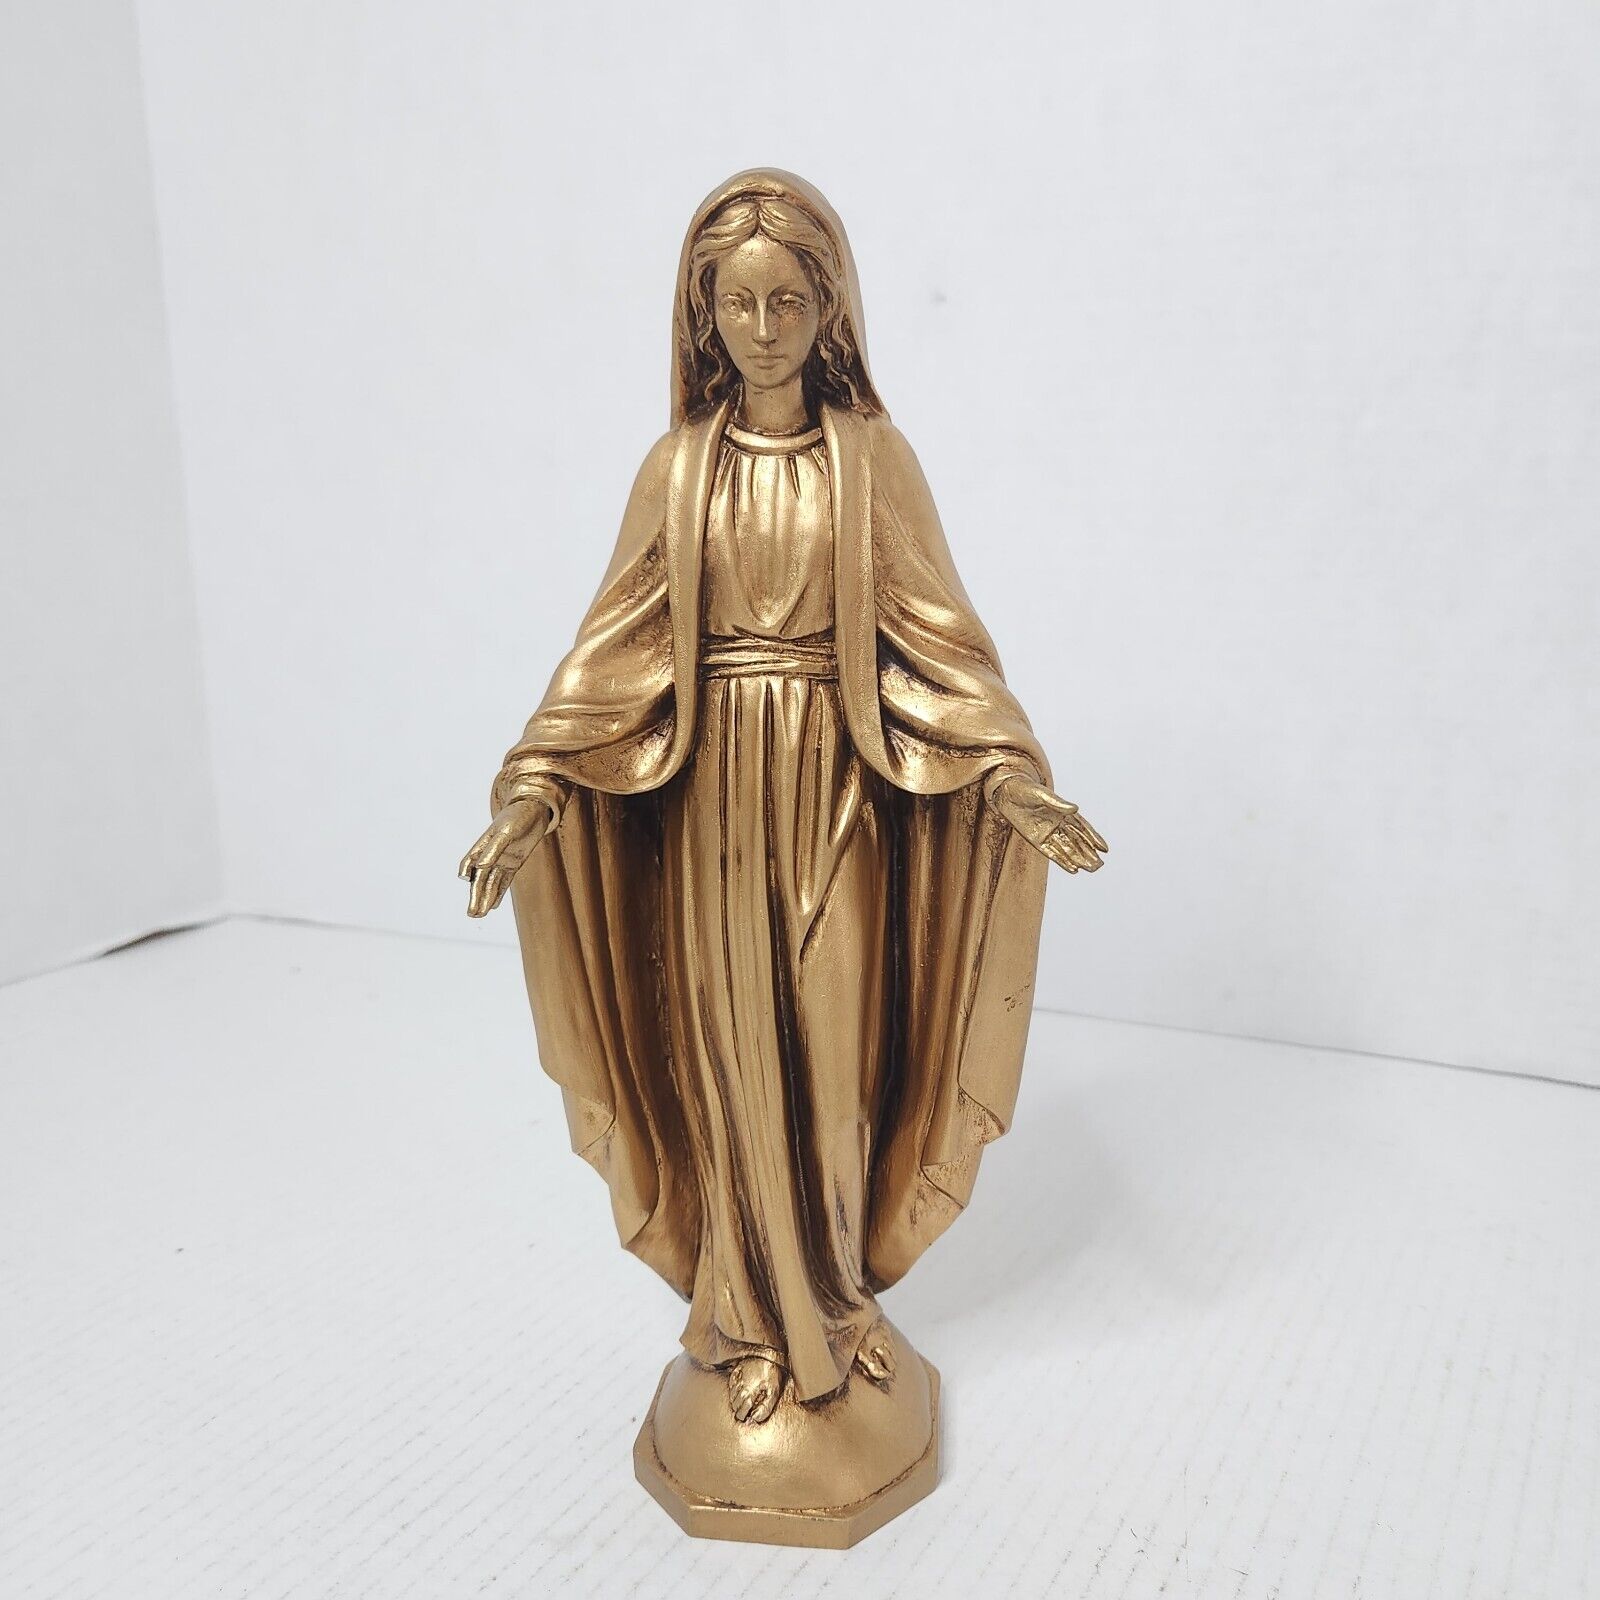 Golden Unmarked VTG Virgin Mary Statue 10.5 Inches High Religious Collectible